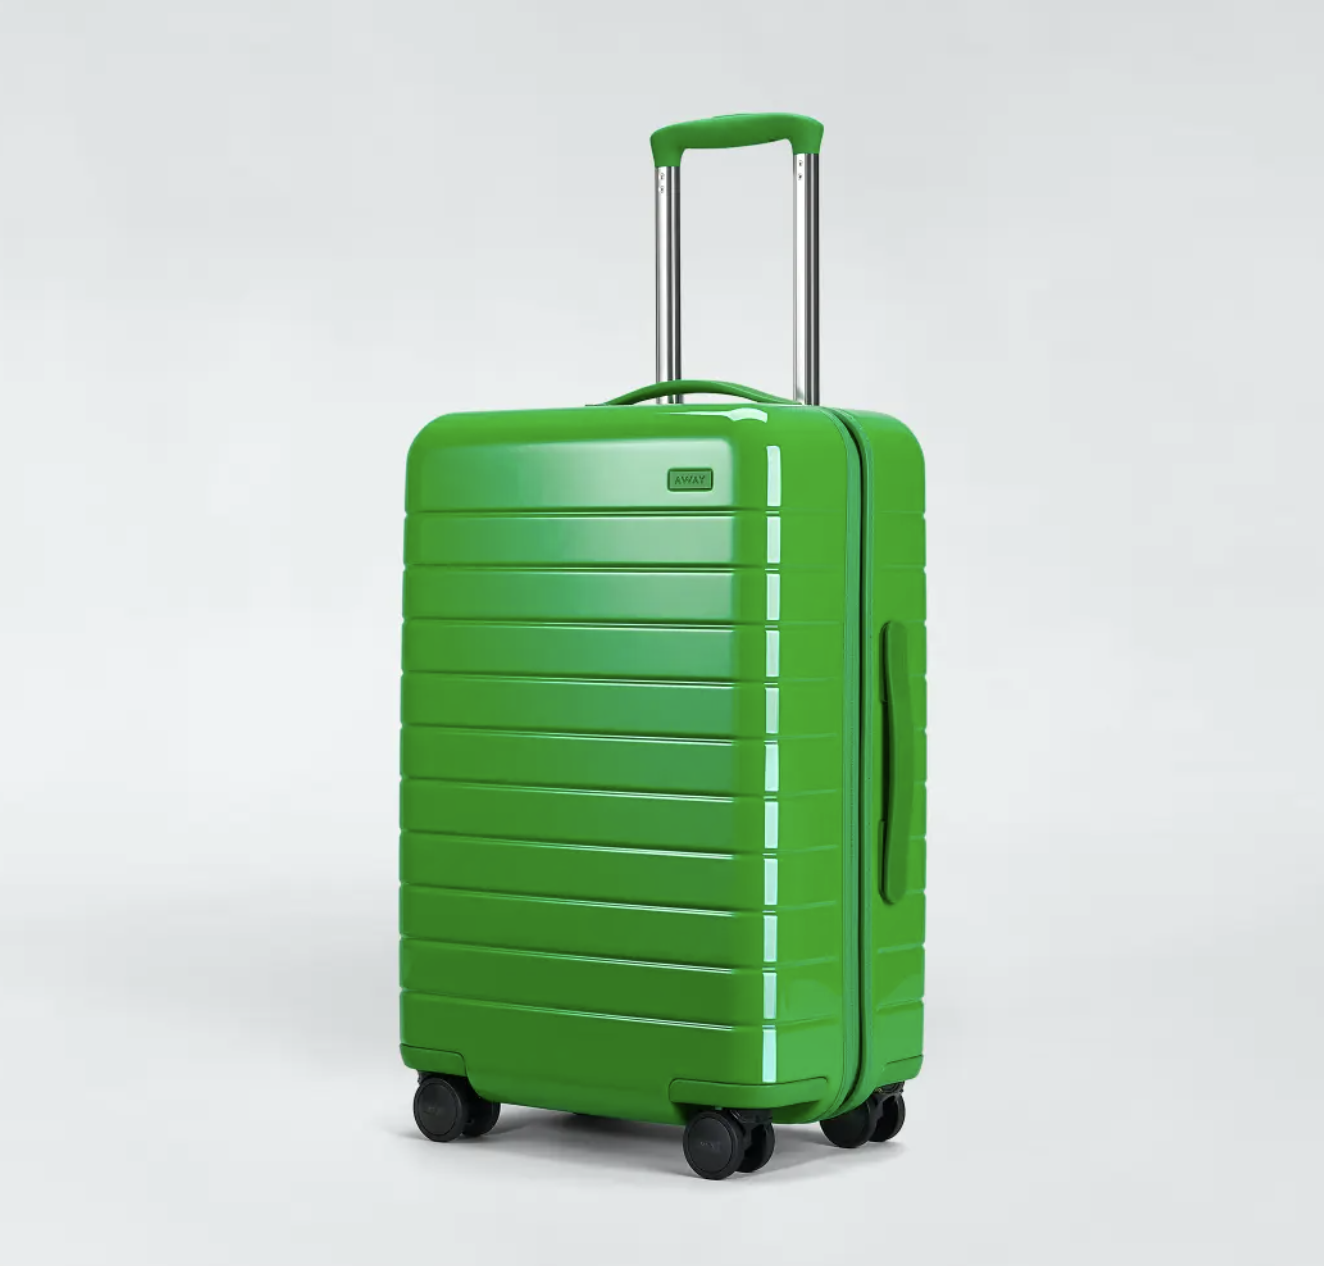 <p><strong>$375.00</strong></p><p>I divide my travel life into before and after my Away suitcase. I would not want to turn back the clock. My favorite is the bigger carry-on size. It’s light, it’s seemingly unbreakable (I’ve stuffed double what I should have inside, and the zippers keep holding up), and the spinner wheels never slow me down. Mine is purple, but I’m eyeing a new zippy version like this one in kiwi. <em>—I.A.</em></p>